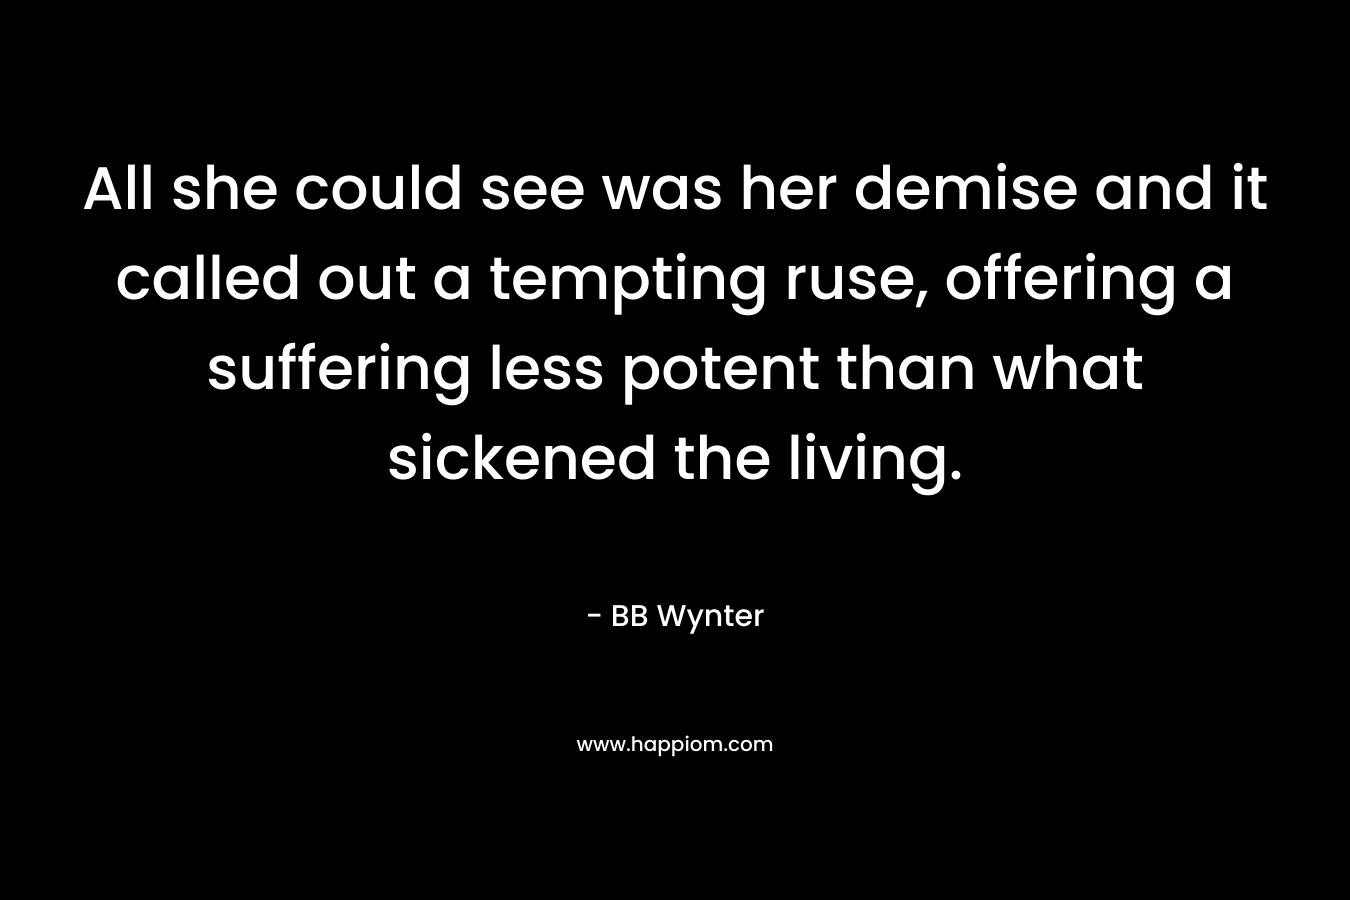 All she could see was her demise and it called out a tempting ruse, offering a suffering less potent than what sickened the living. – BB Wynter